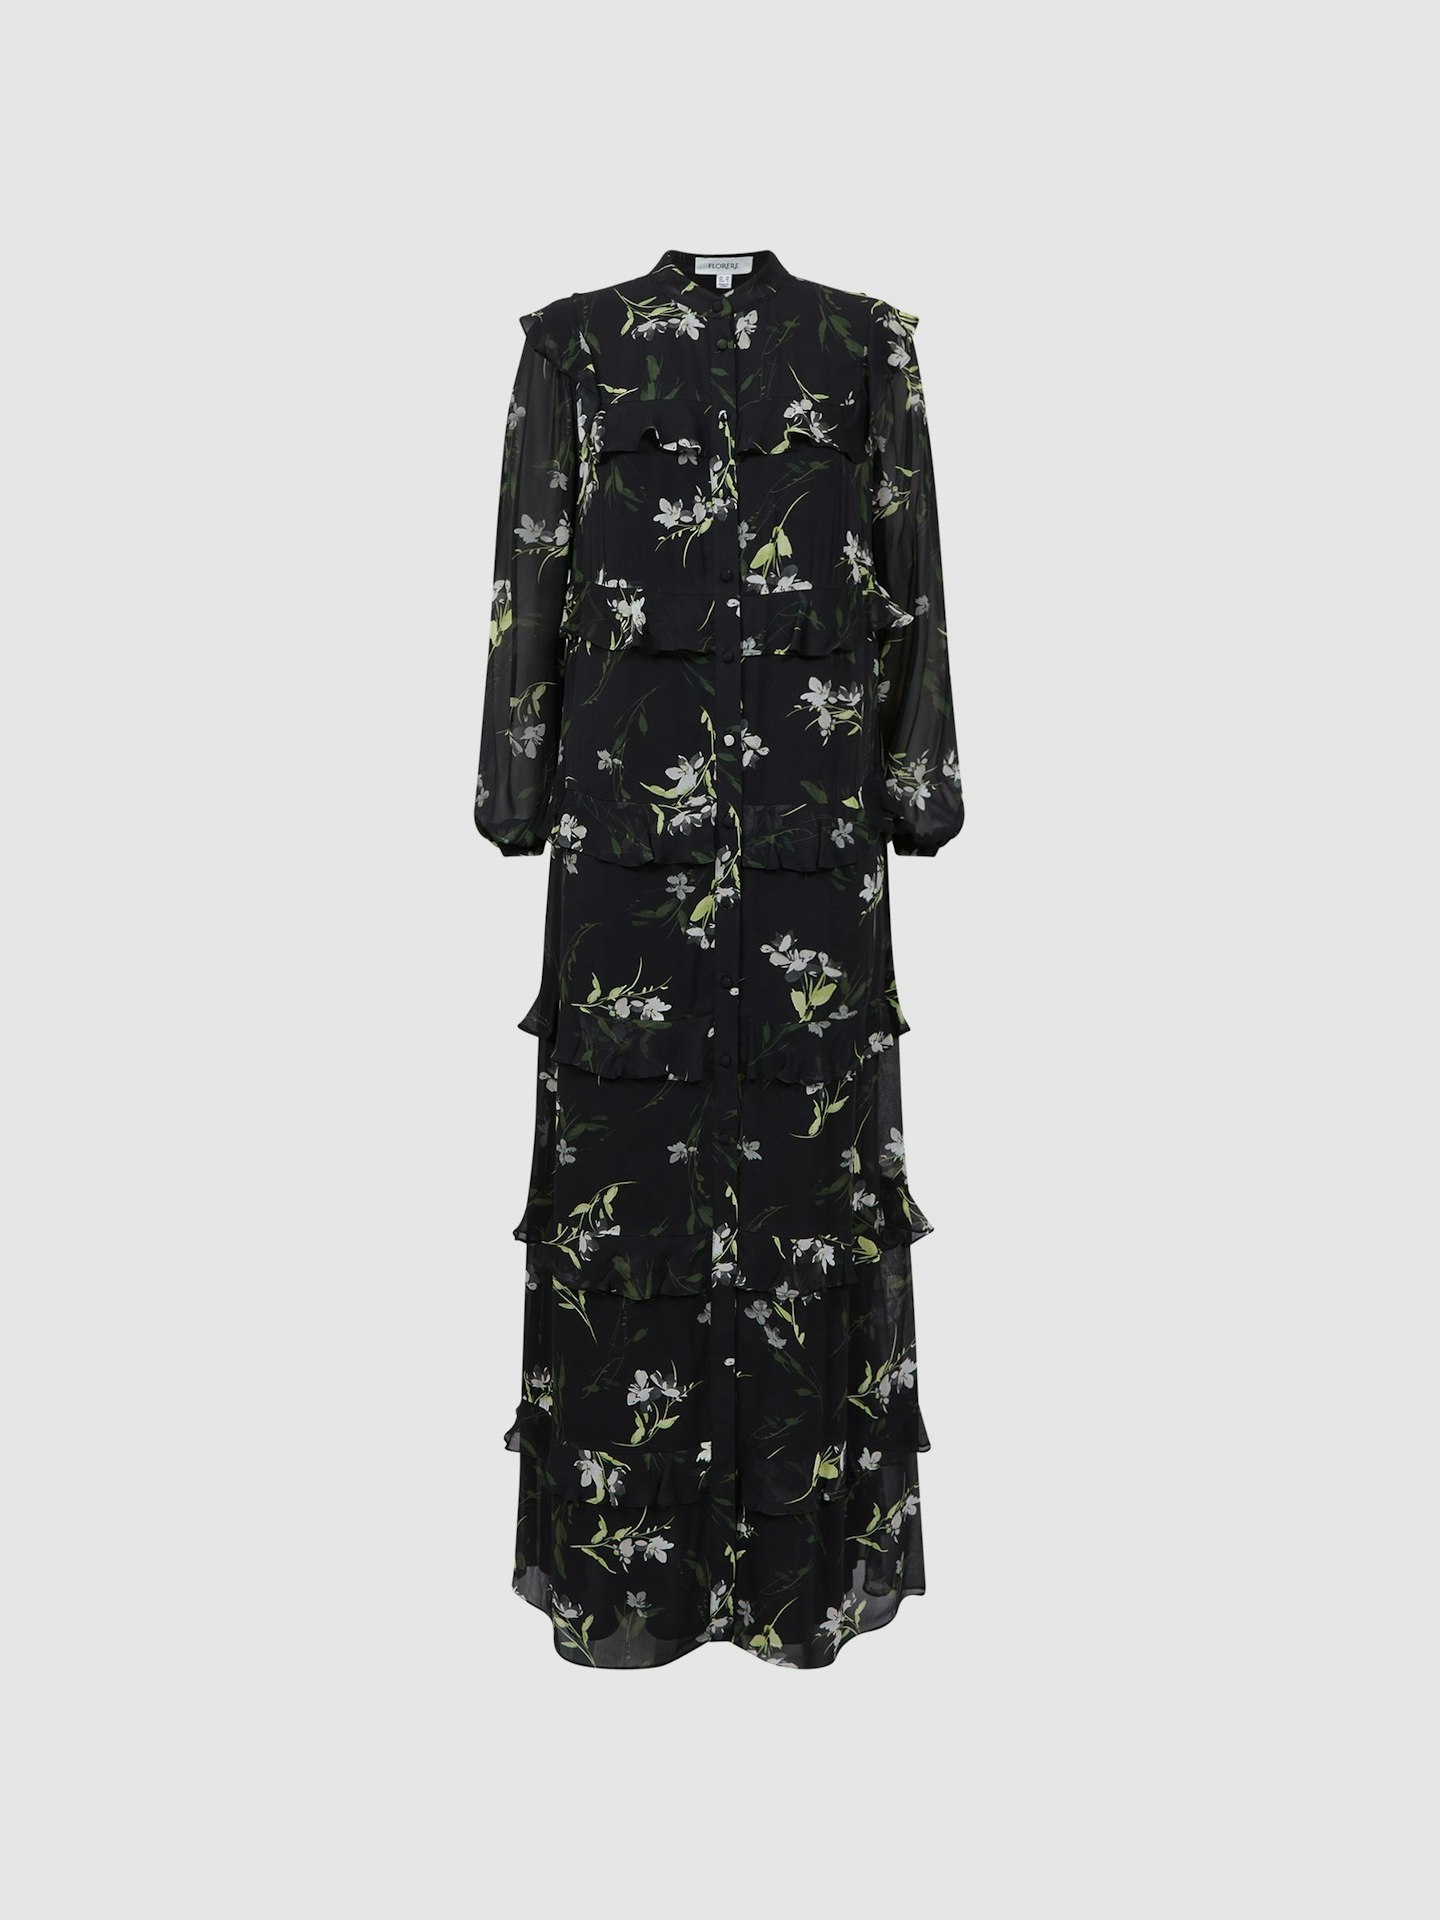 Reiss, Floral Tiered Maxi Dress